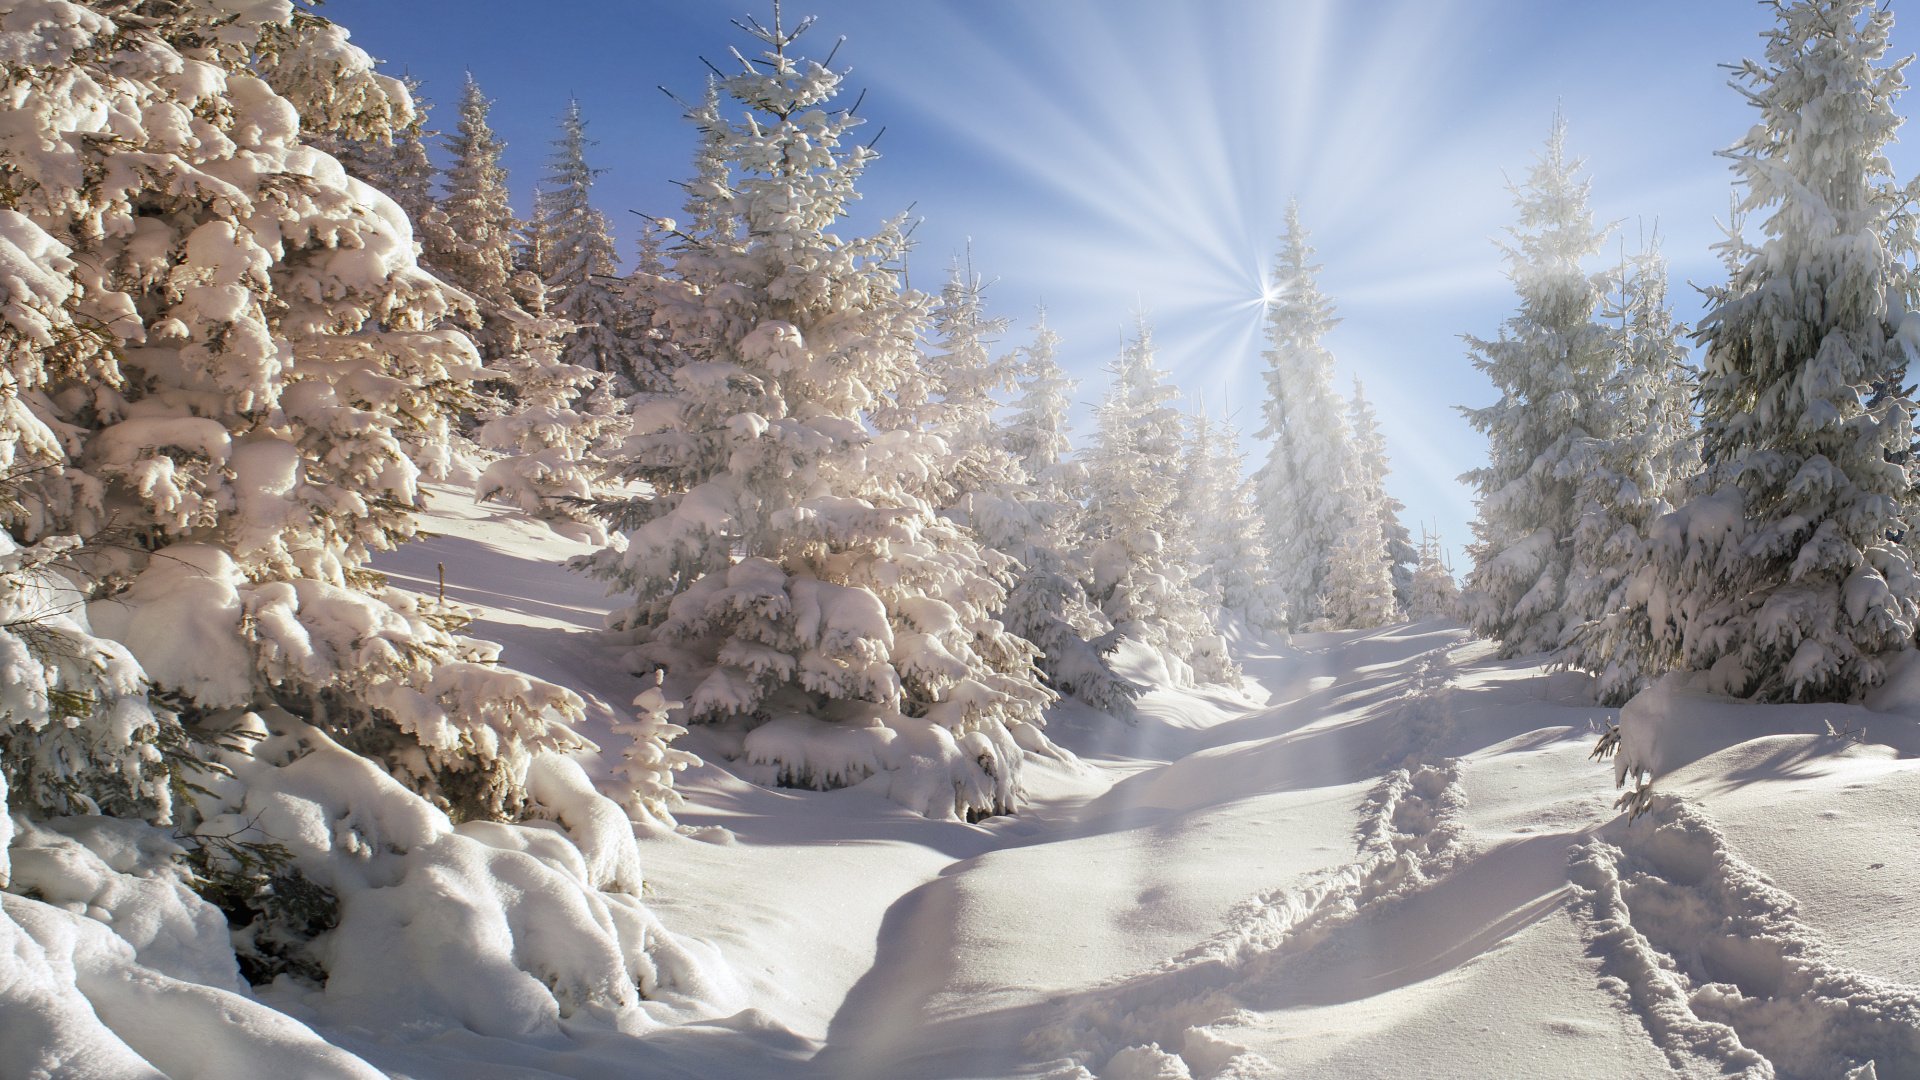 Snow Covered Trees Under Blue Sky During Daytime. Wallpaper in 1920x1080 Resolution